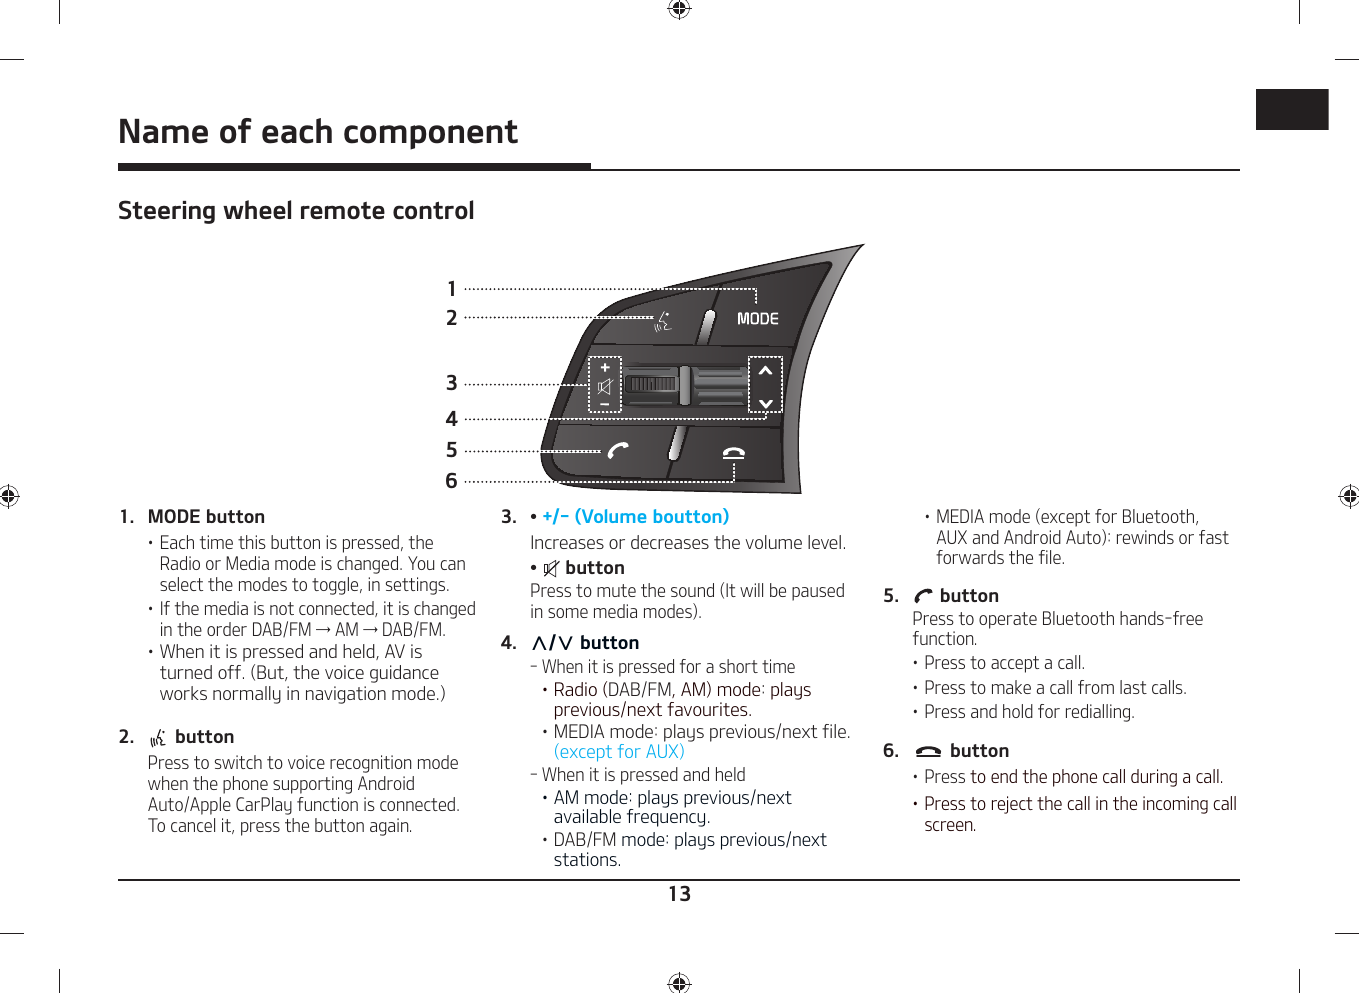 13Name of each componentSteering wheel remote control1265341.  MODE button 䳜 Each time this button is pressed, the Radio or Media mode is changed. You can select the modes to toggle, in settings.䳜 If the media is not connected, it is changed in the order DAB/FM → AM → DAB/FM.䳜 When it is pressed and held, AV is turned off. (But, the voice guidance works normally in navigation mode.)2.   button   Press to switch to voice recognition mode when the phone supporting Android Auto/Apple CarPlay function is connected.To cancel it, press the button again.3.   䳜 +/- (Volume boutton)  Increases or decreases the volume level. 䳜   button  Press to mute the sound (It will be paused in some media modes).4.  W/S button ‐ When it is pressed for a short time 䳜 Radio (DAB/FM, AM) mode: plays previous/next favourites.䳜 MEDIA mode: plays previous/next file. (except for AUX)  ‐ When it is pressed and held 䳜 AM mode: plays previous/next available frequency.䳜 DAB/FM mode: plays previous/next stations.䳜 MEDIA mode (except for Bluetooth, AUX and Android Auto): rewinds or fast forwards the file. 5.   button  Press to operate Bluetooth hands-free function.䳜 Press to accept a call.䳜 Press to make a call from last calls.䳜 Press and hold for redialling.6.   button䳜 Press to end the phone call during a call.䳜 Press to reject the call in the incoming call screen.